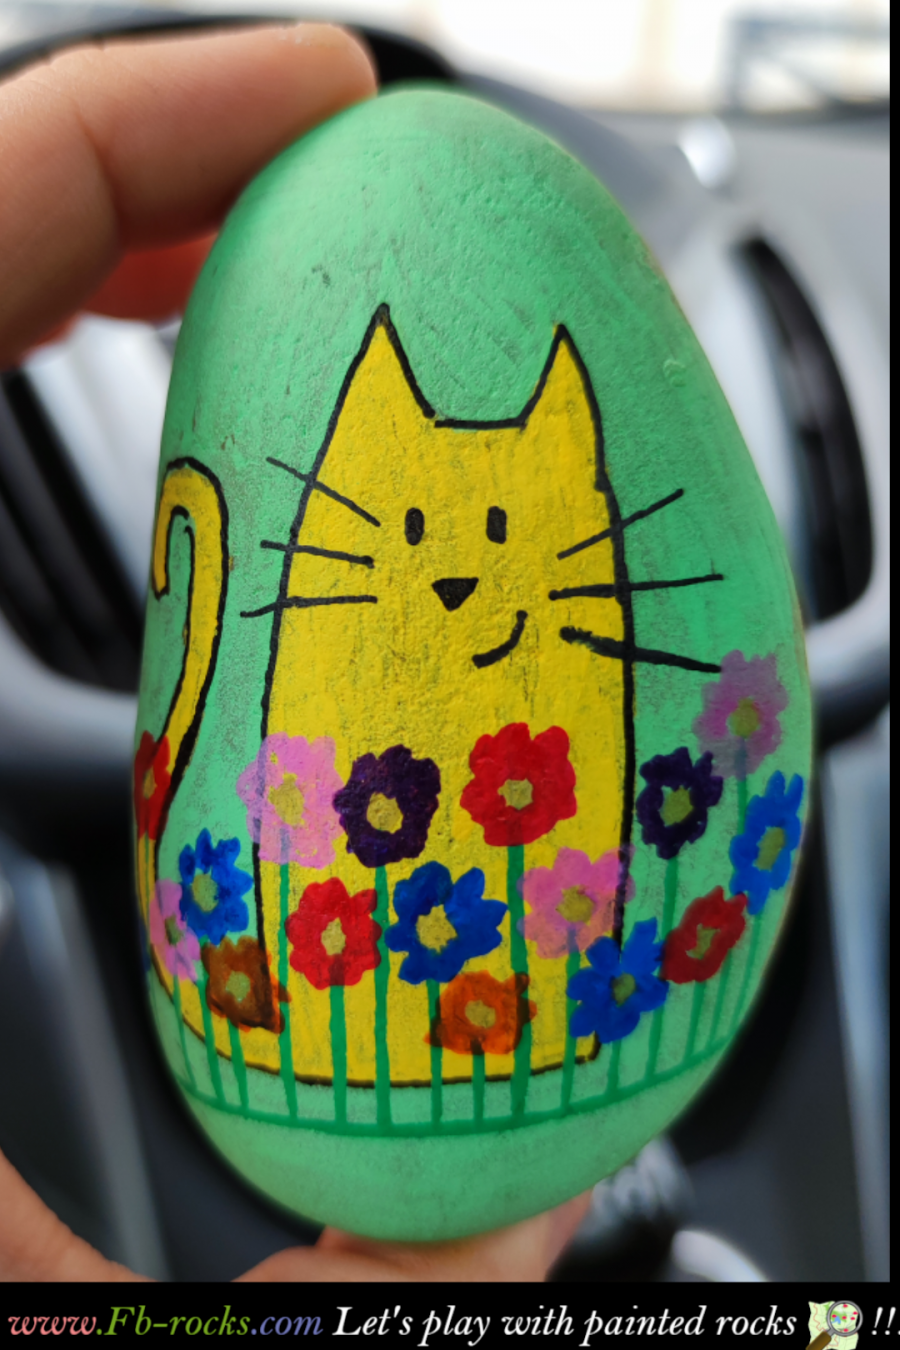 Animal : cat Cat drawing with flowers : 1687293792.polish.20230620.215156734.png